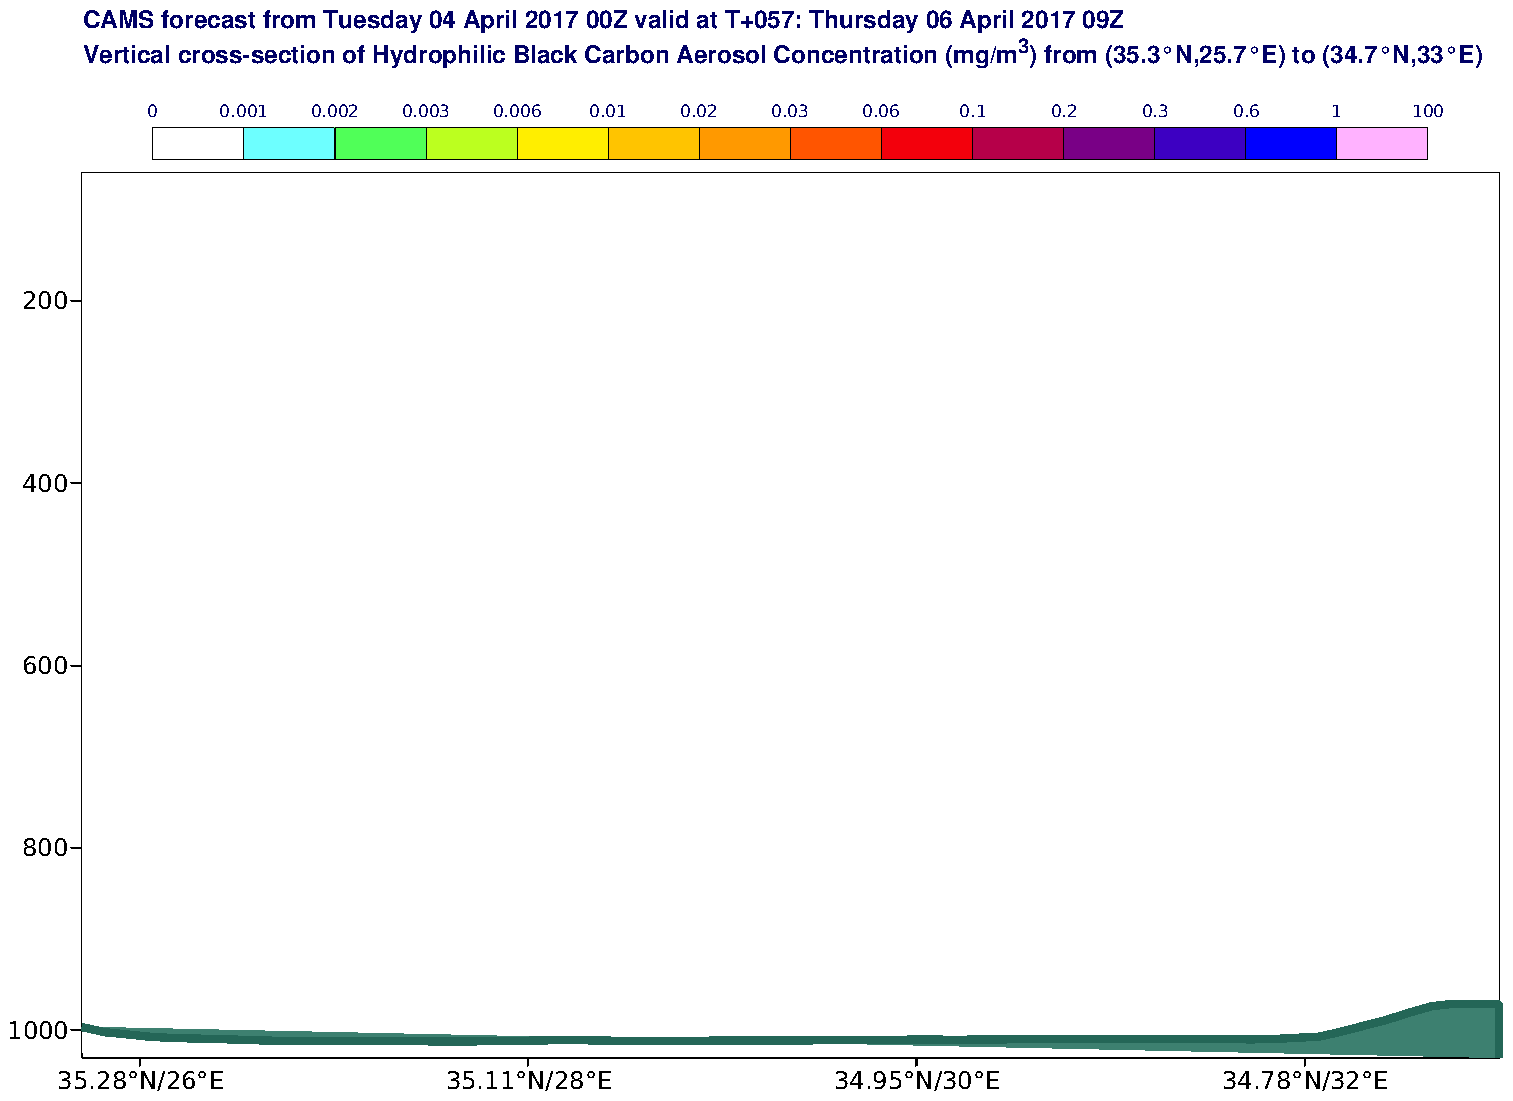 Vertical cross-section of Hydrophilic Black Carbon Aerosol Concentration (mg/m3) valid at T57 - 2017-04-06 09:00